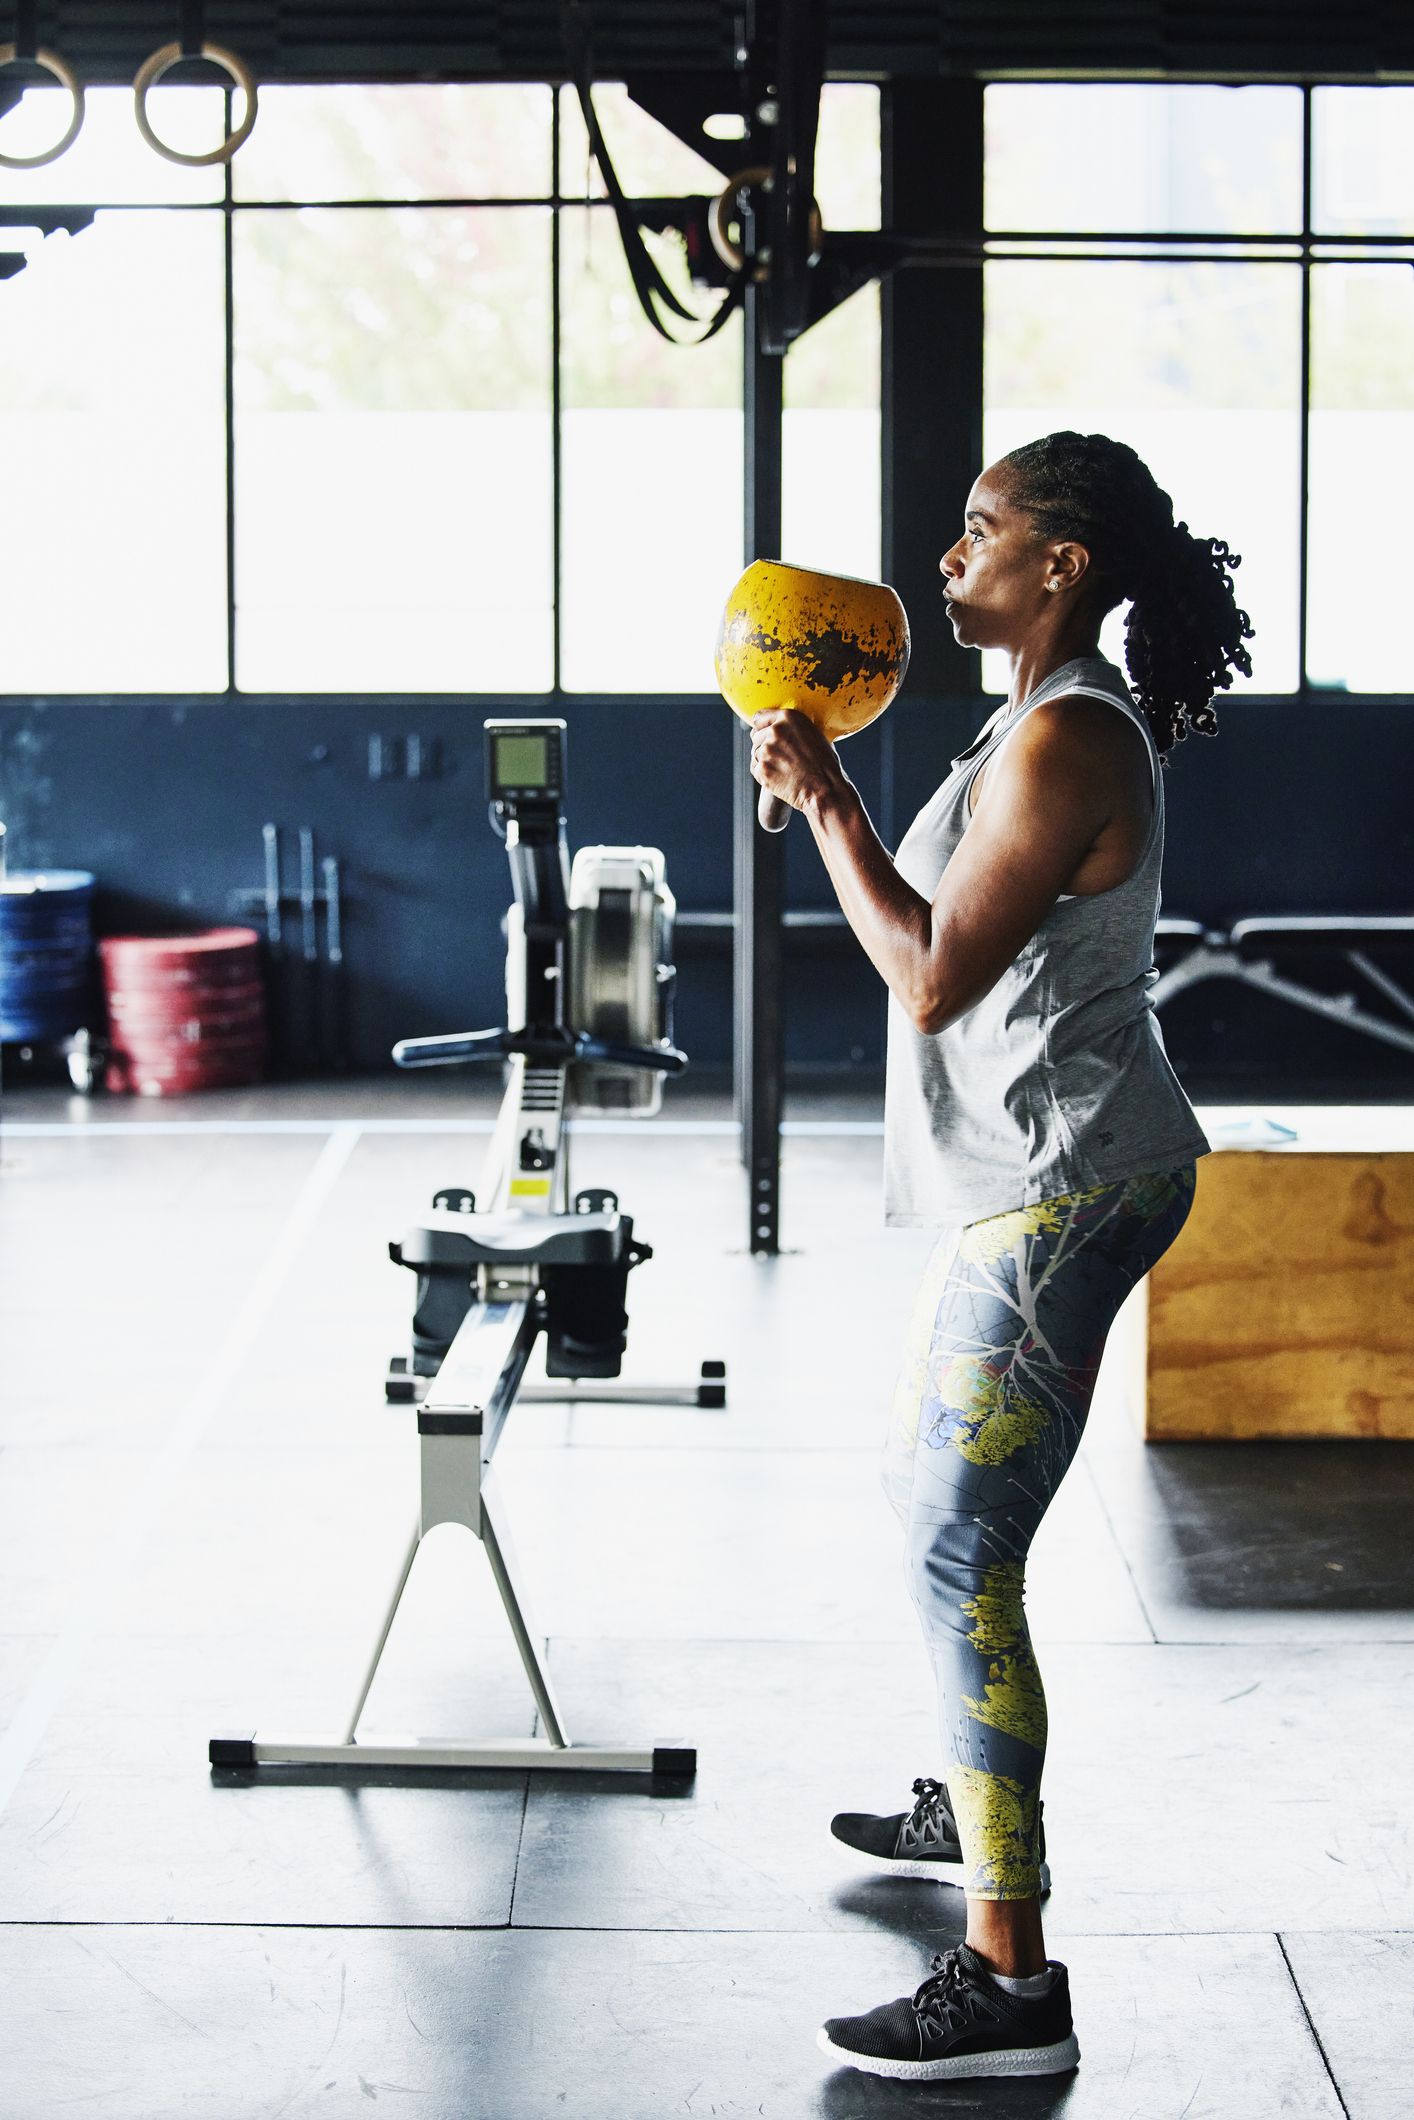 Best kettlebells for weightlifting and home workouts